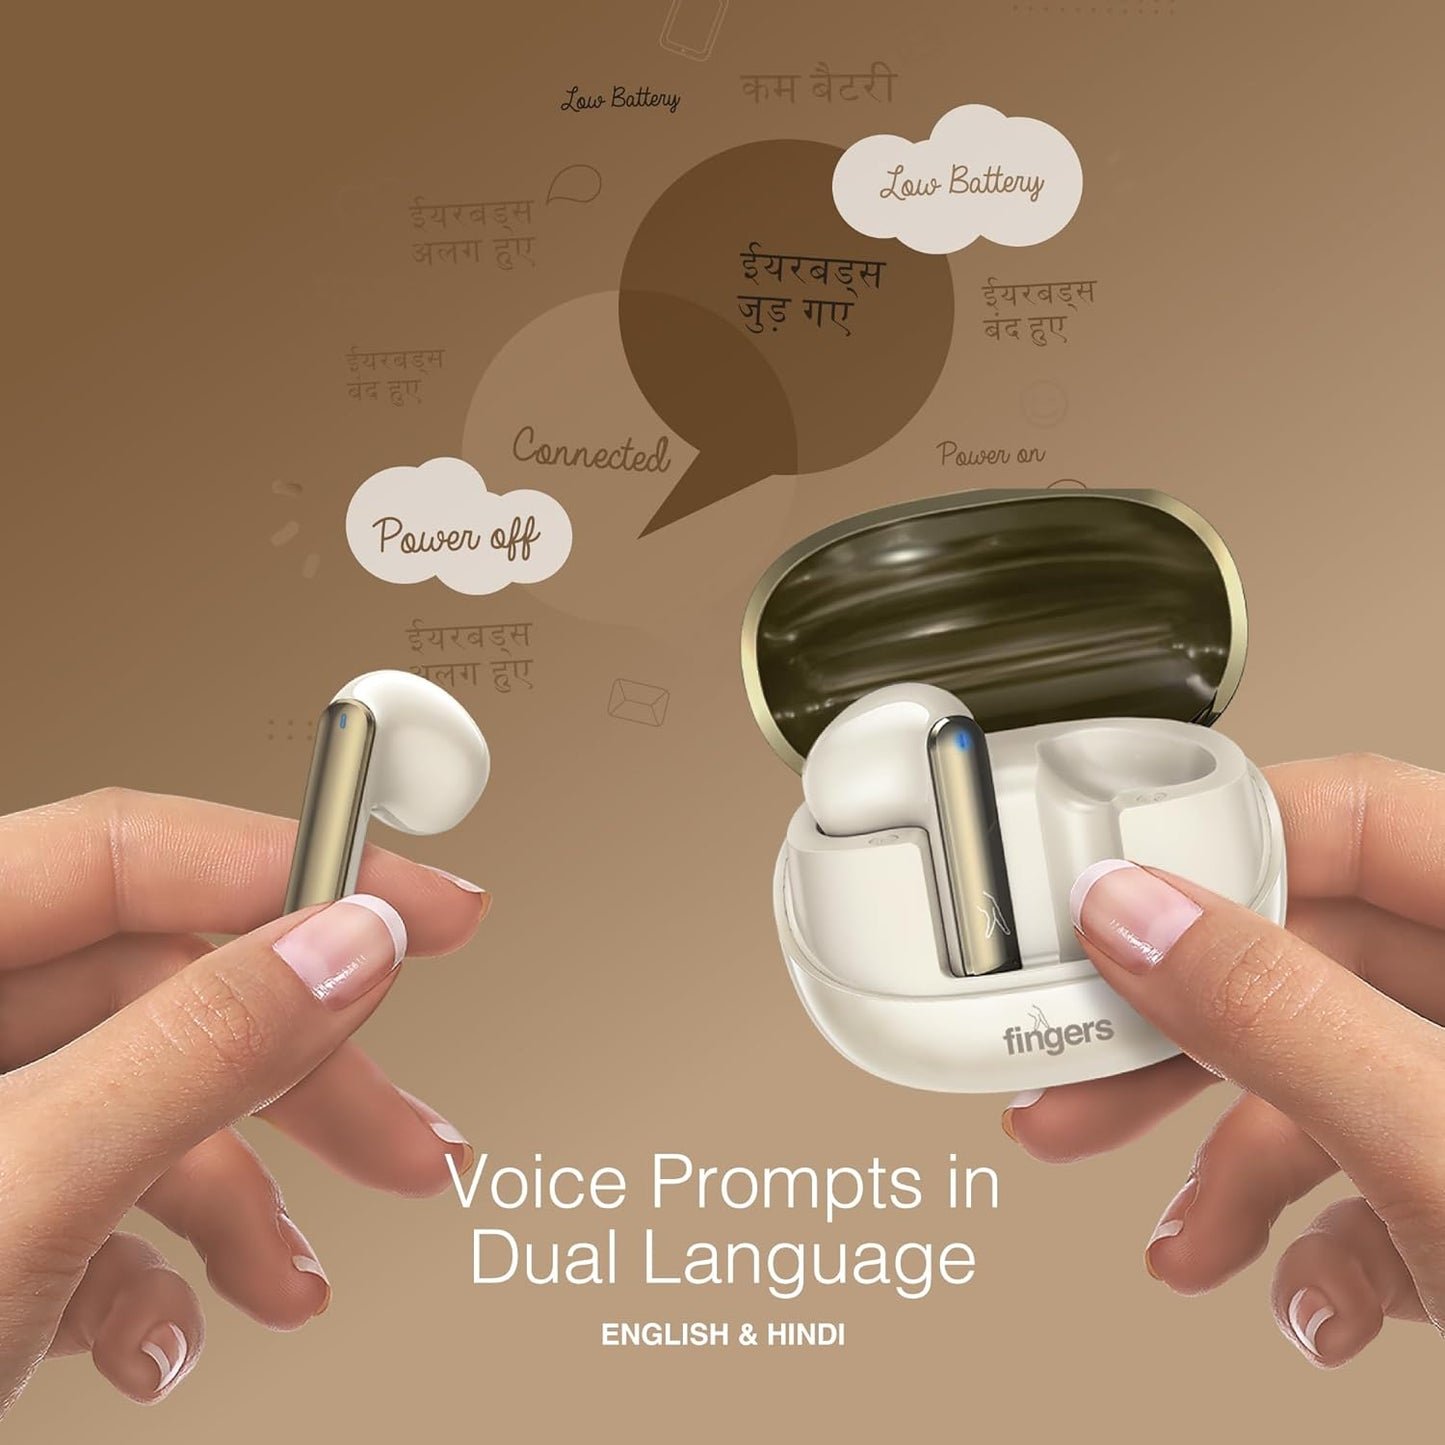 FINGERS Hi-Class TWS Earbuds - Classy | High-Class Sound, 24 Hours Playtime, Surround Noise Cancellation, Dual Language Voice Prompts, Intuitive Touch Controls (Champagne + Ivory White)-Fingers-computerspace